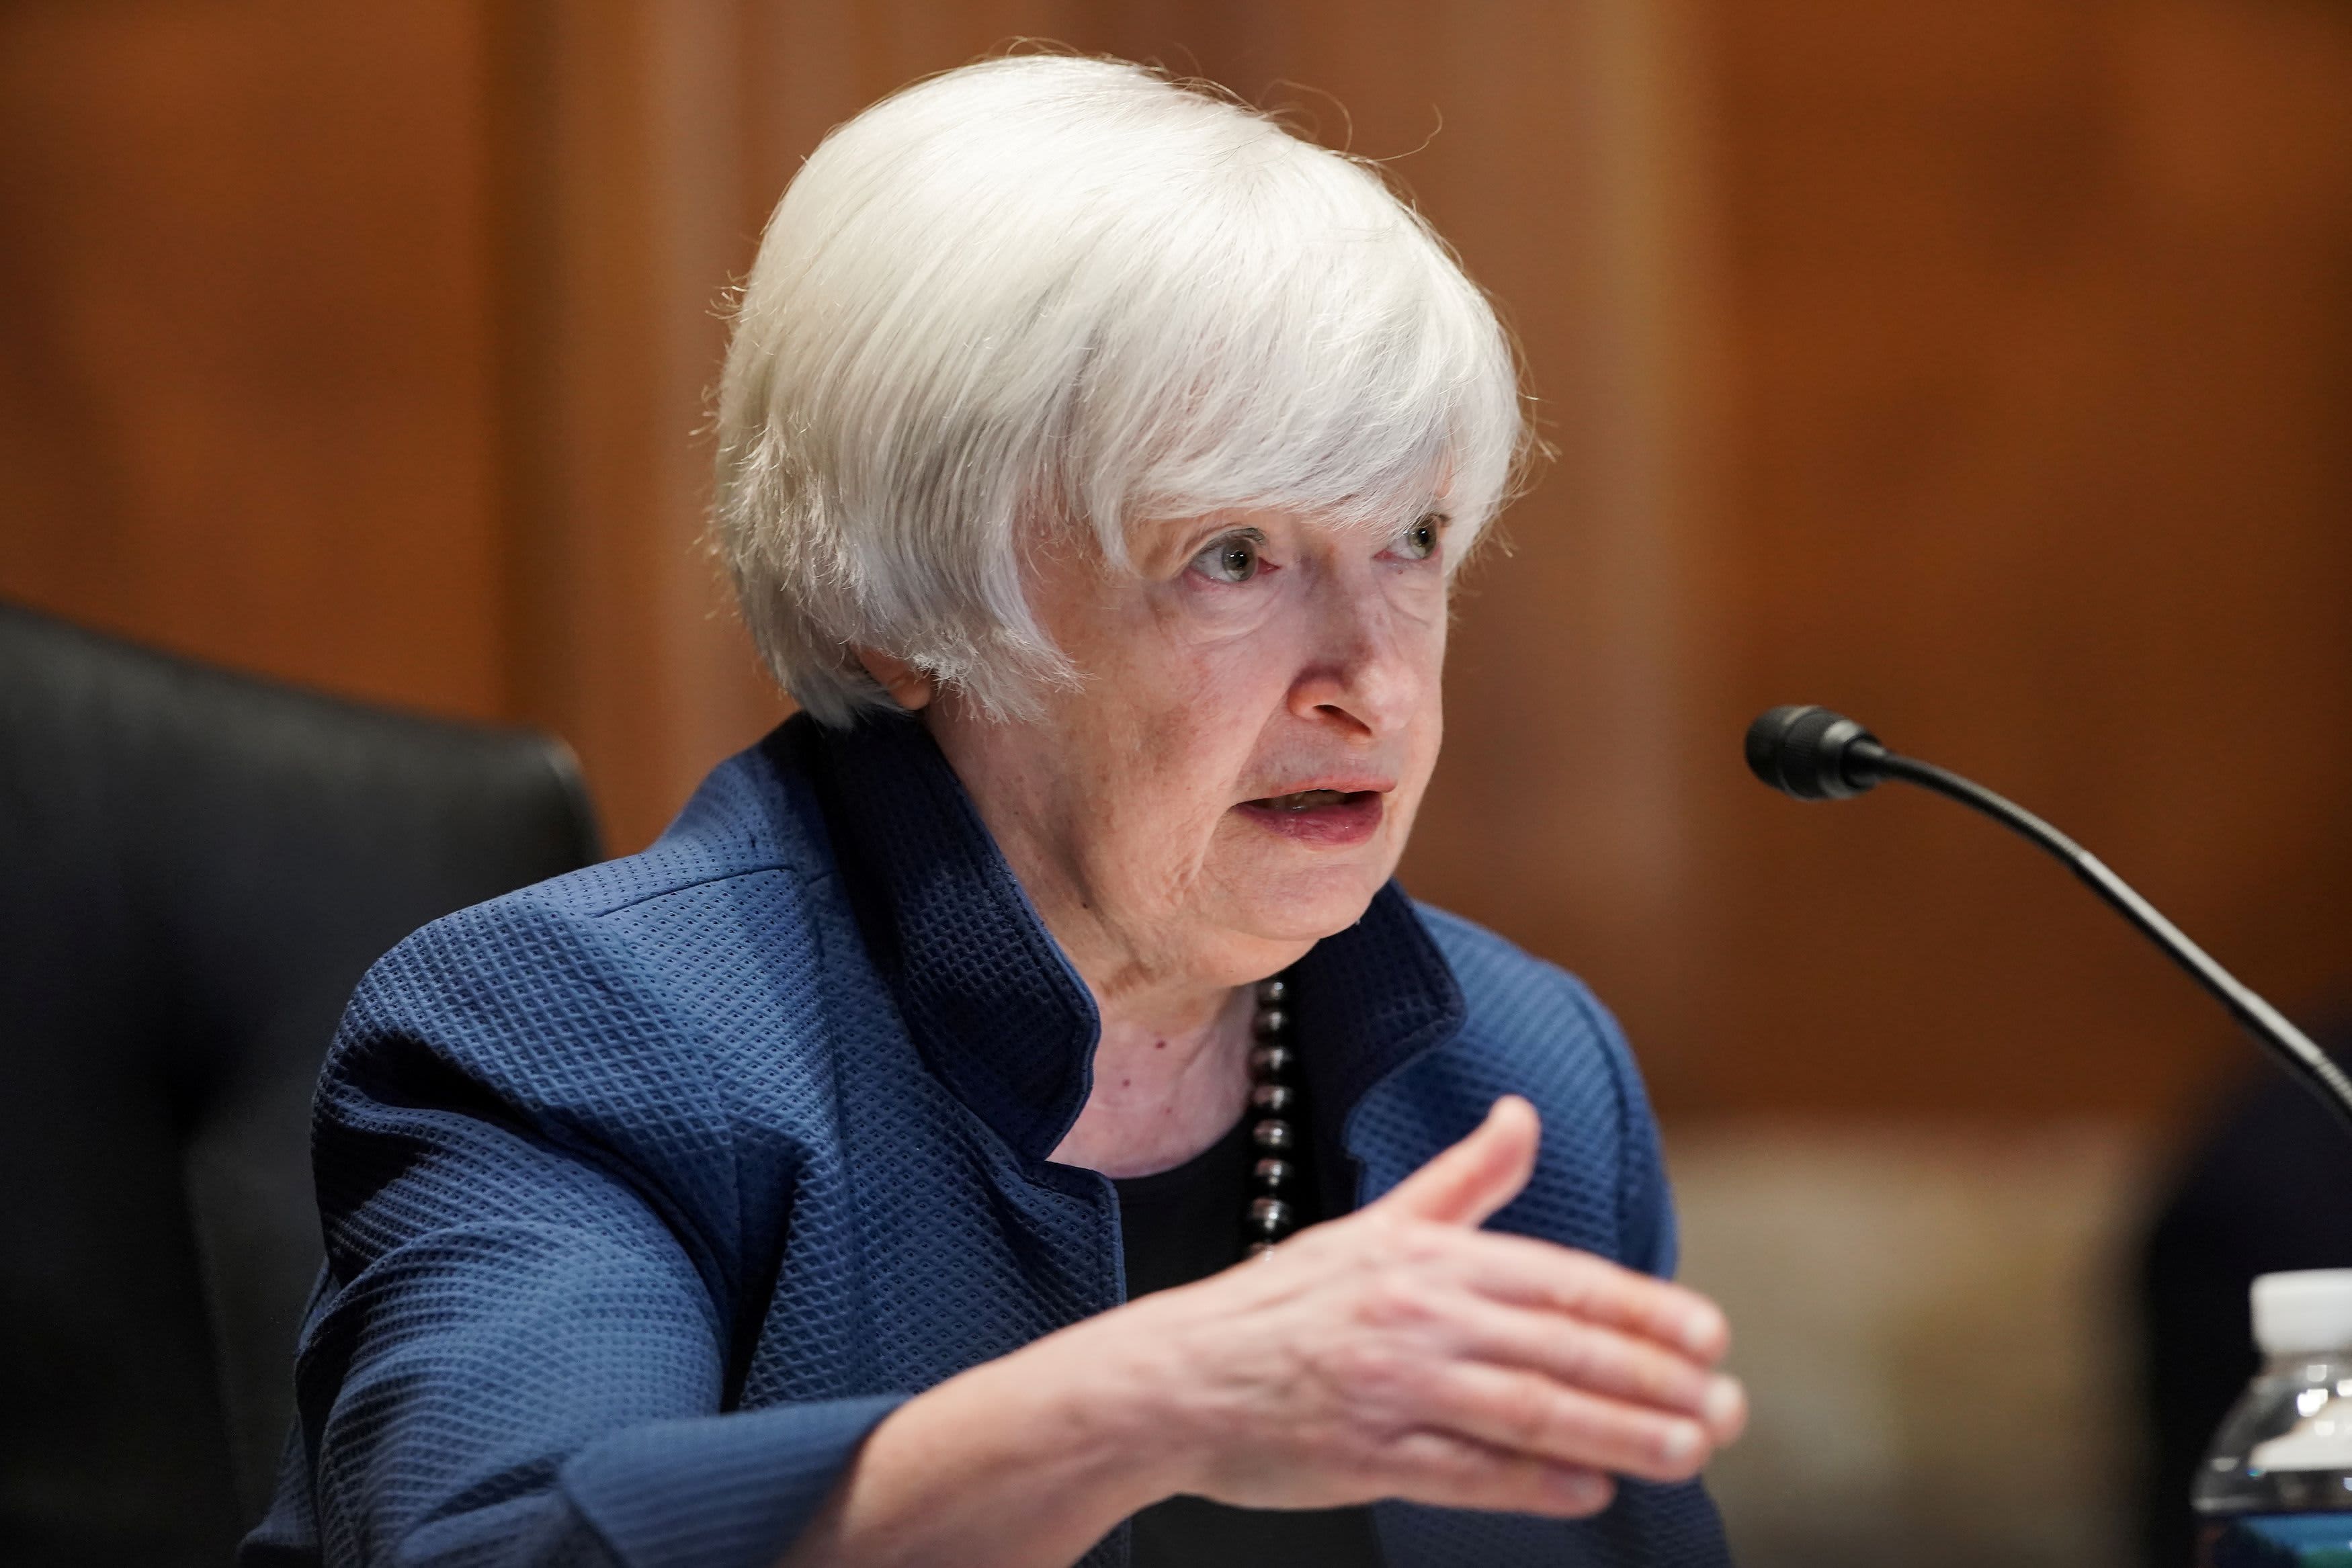 Yellen wants debt limit raised by Aug. 2, warning the U.S. could end up in default if not